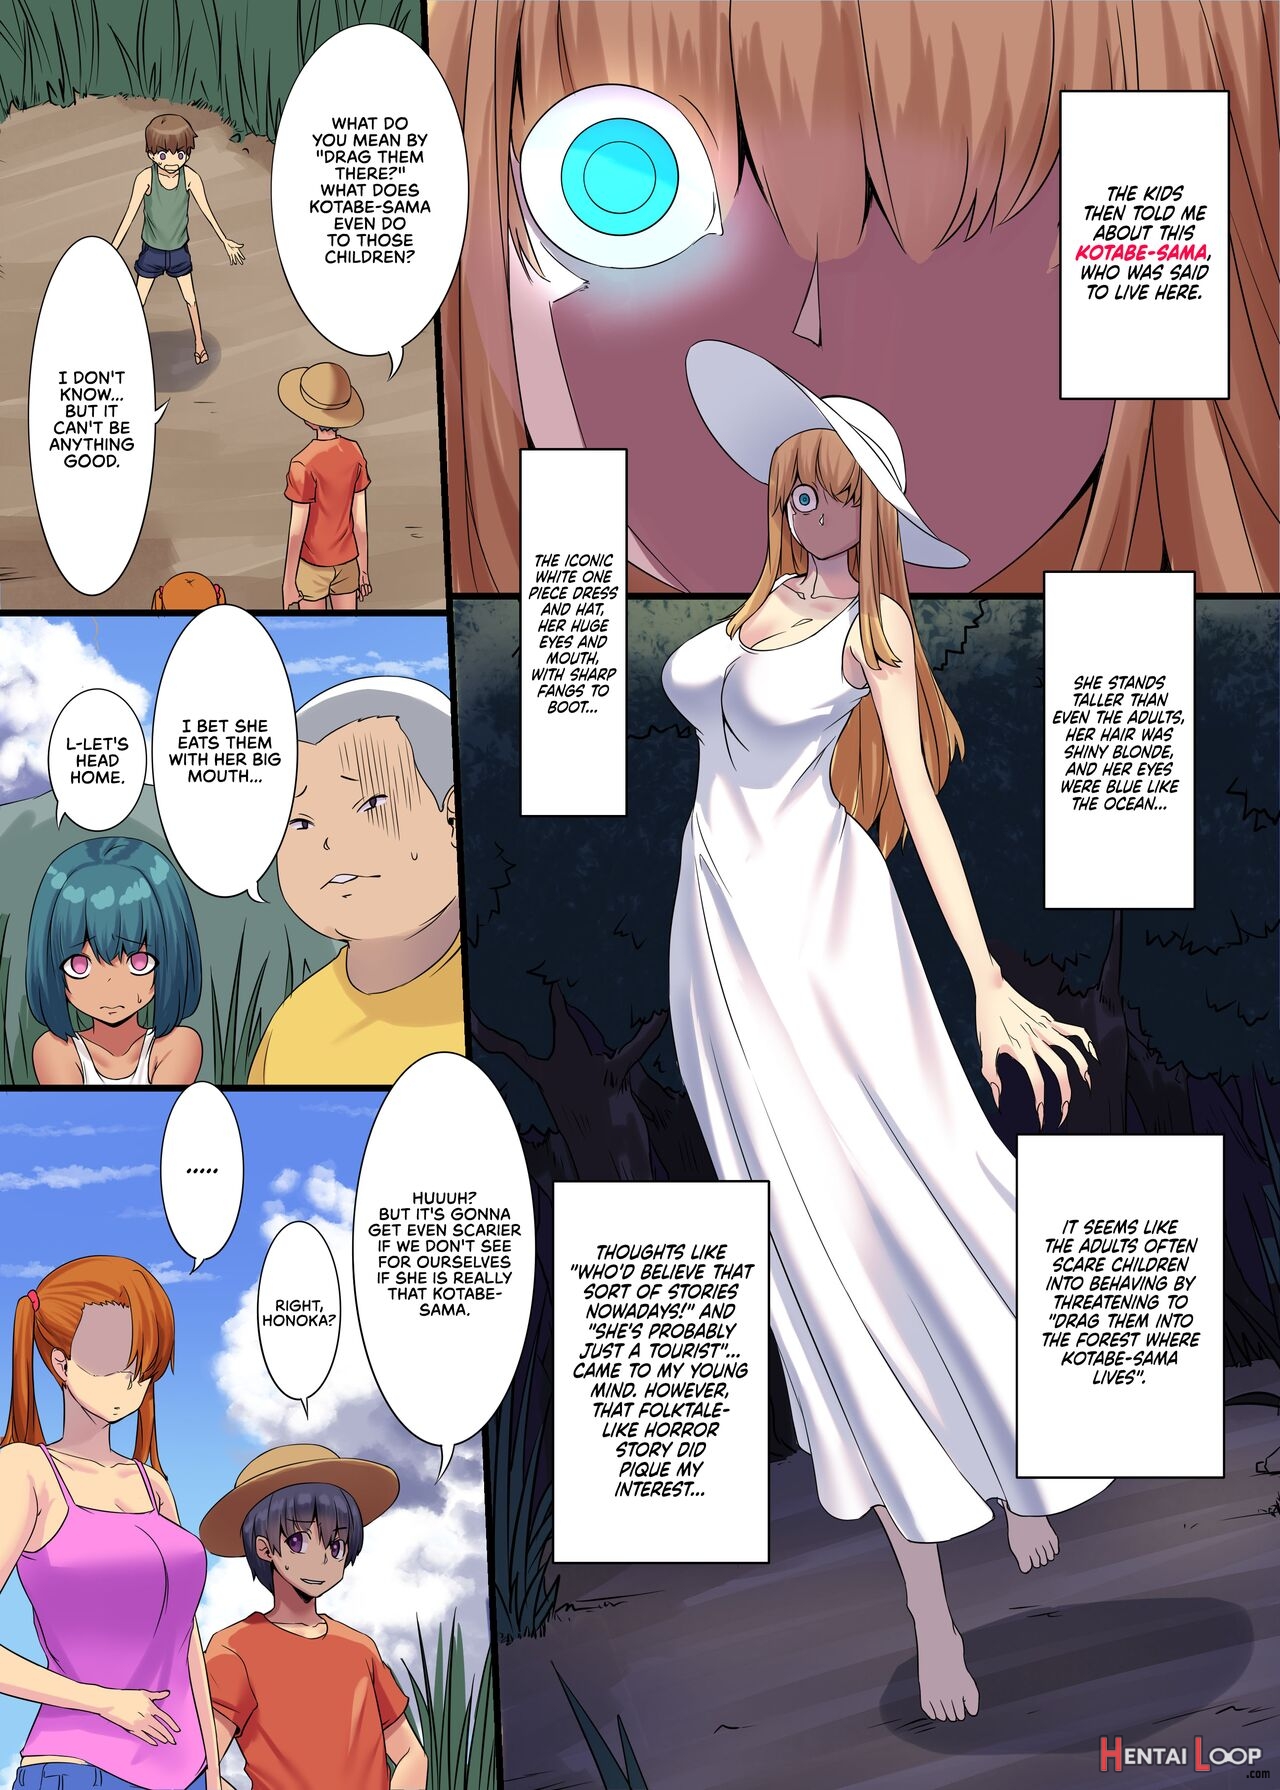 Adultery Tales With The Bizarre ~kotabe-sama Of A Remote Island Arc~ page 6